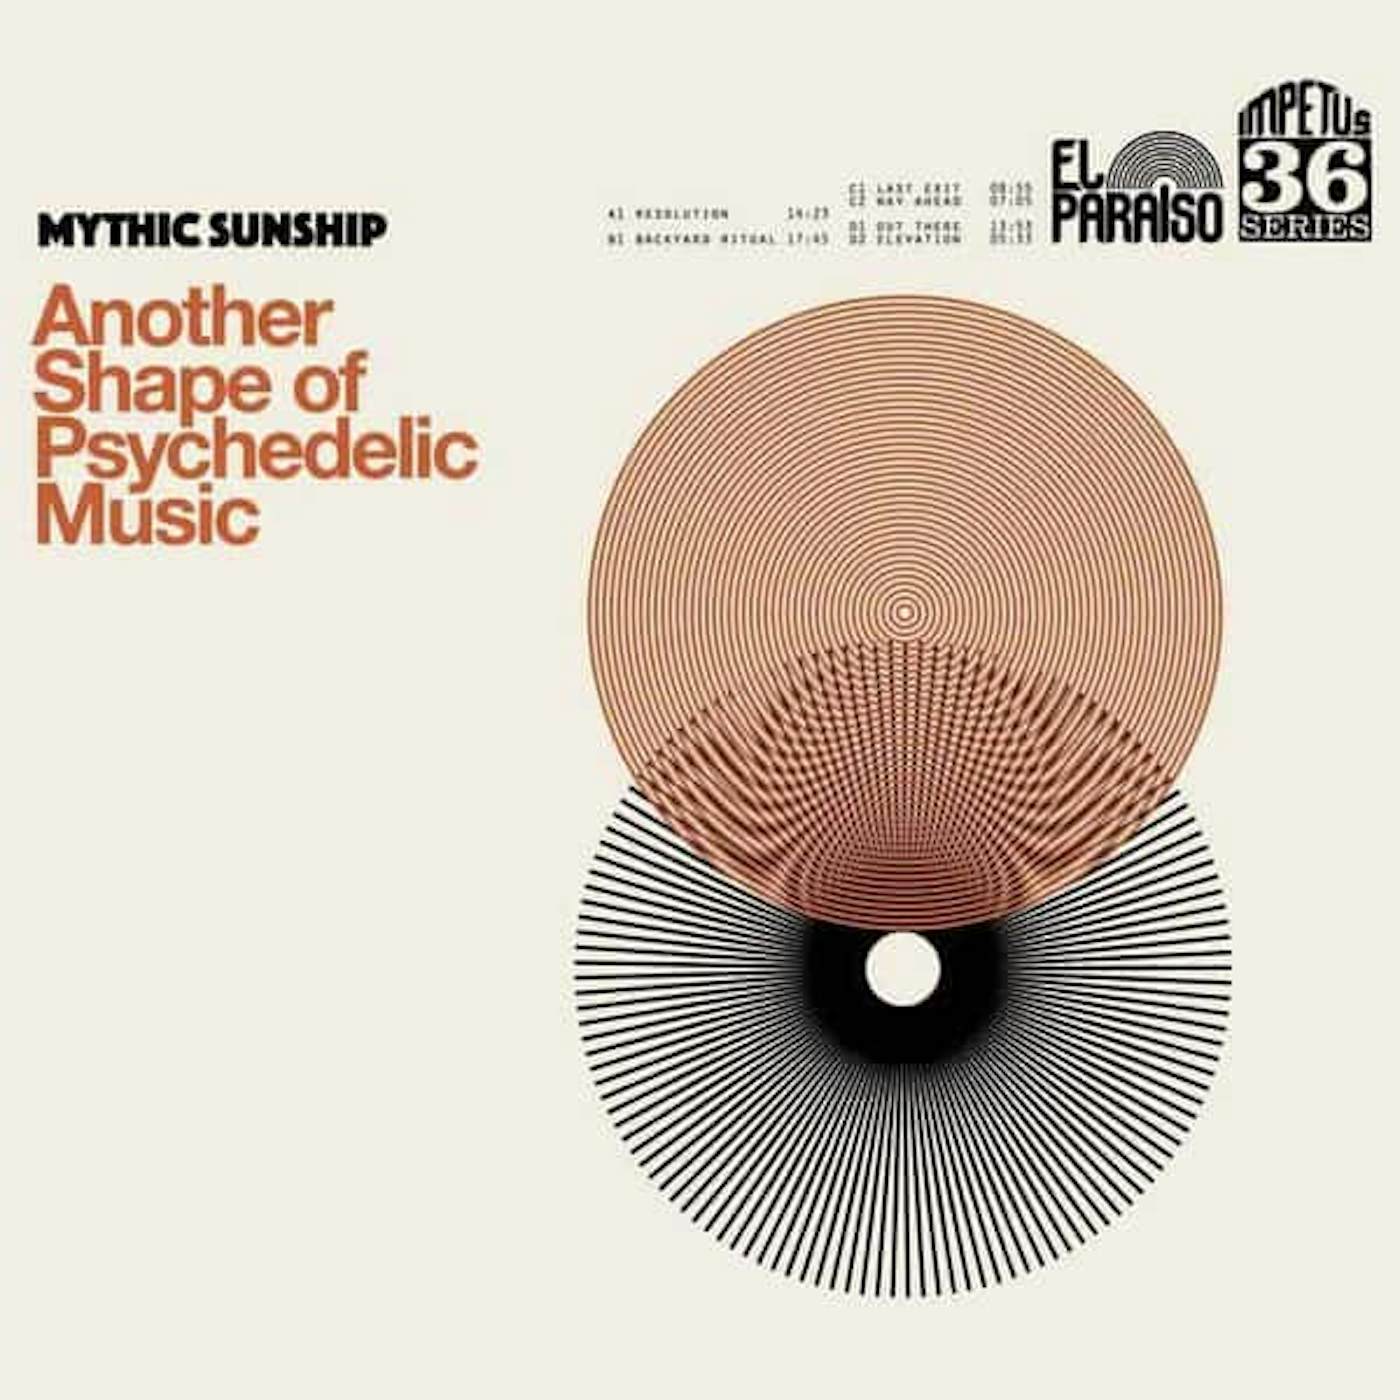 Mythic Sunship Another Shape Of Psychedelic Music Vinyl Record